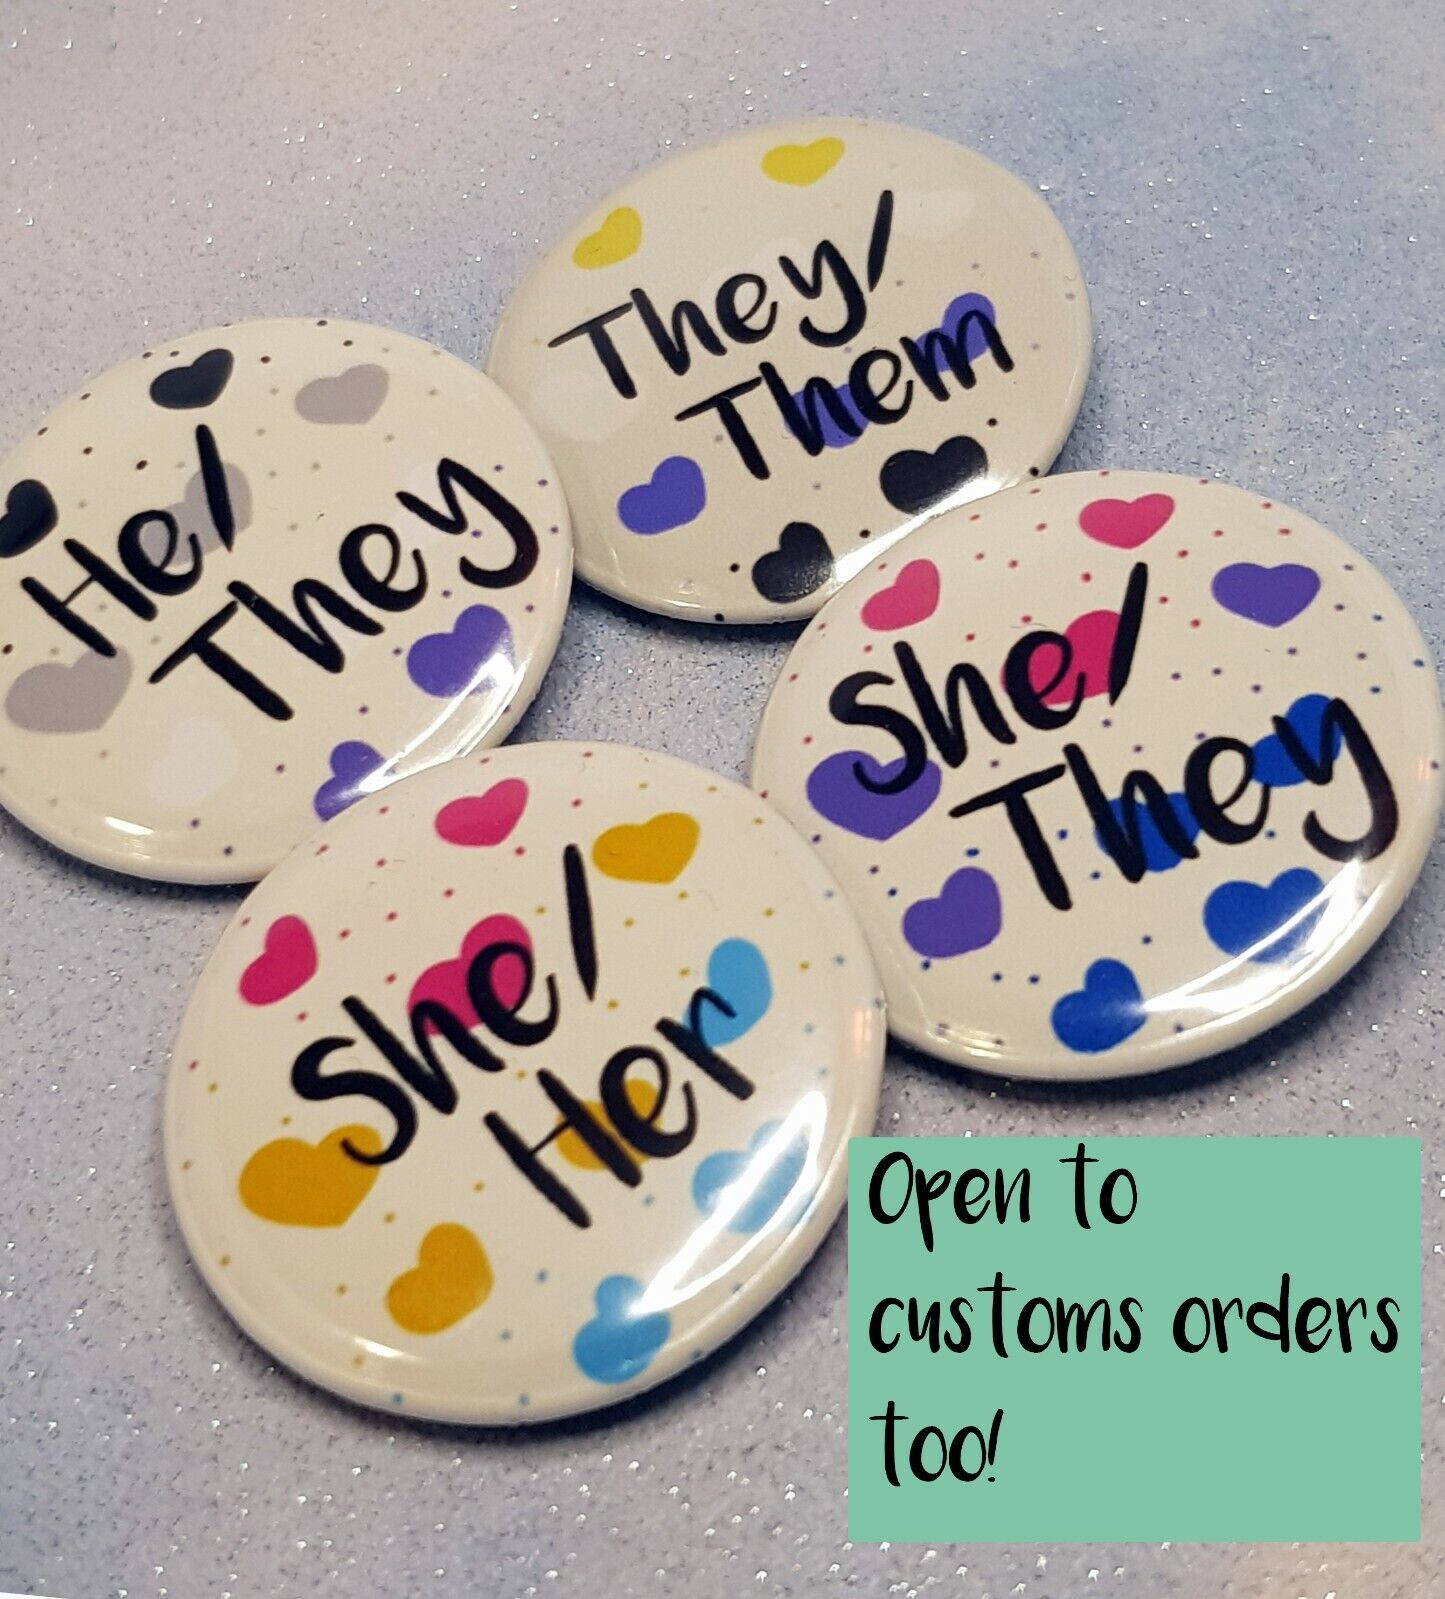 Pronoun Flag Heart Badges - Pride, He She They Them Him Her, Trans, Asexual